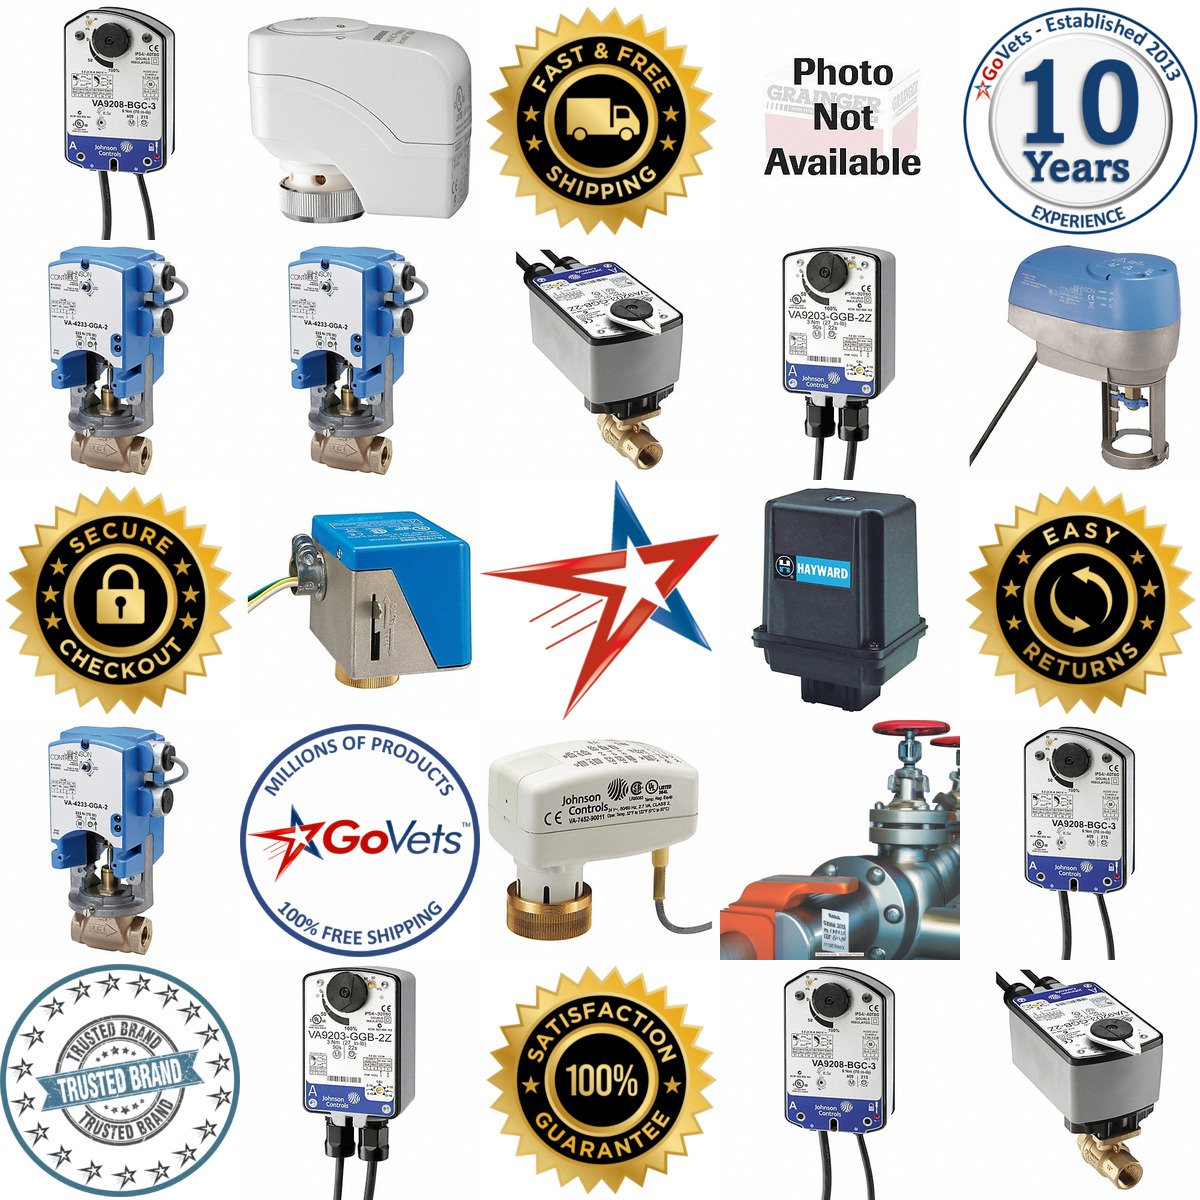 A selection of Electric Valve Actuators products on GoVets